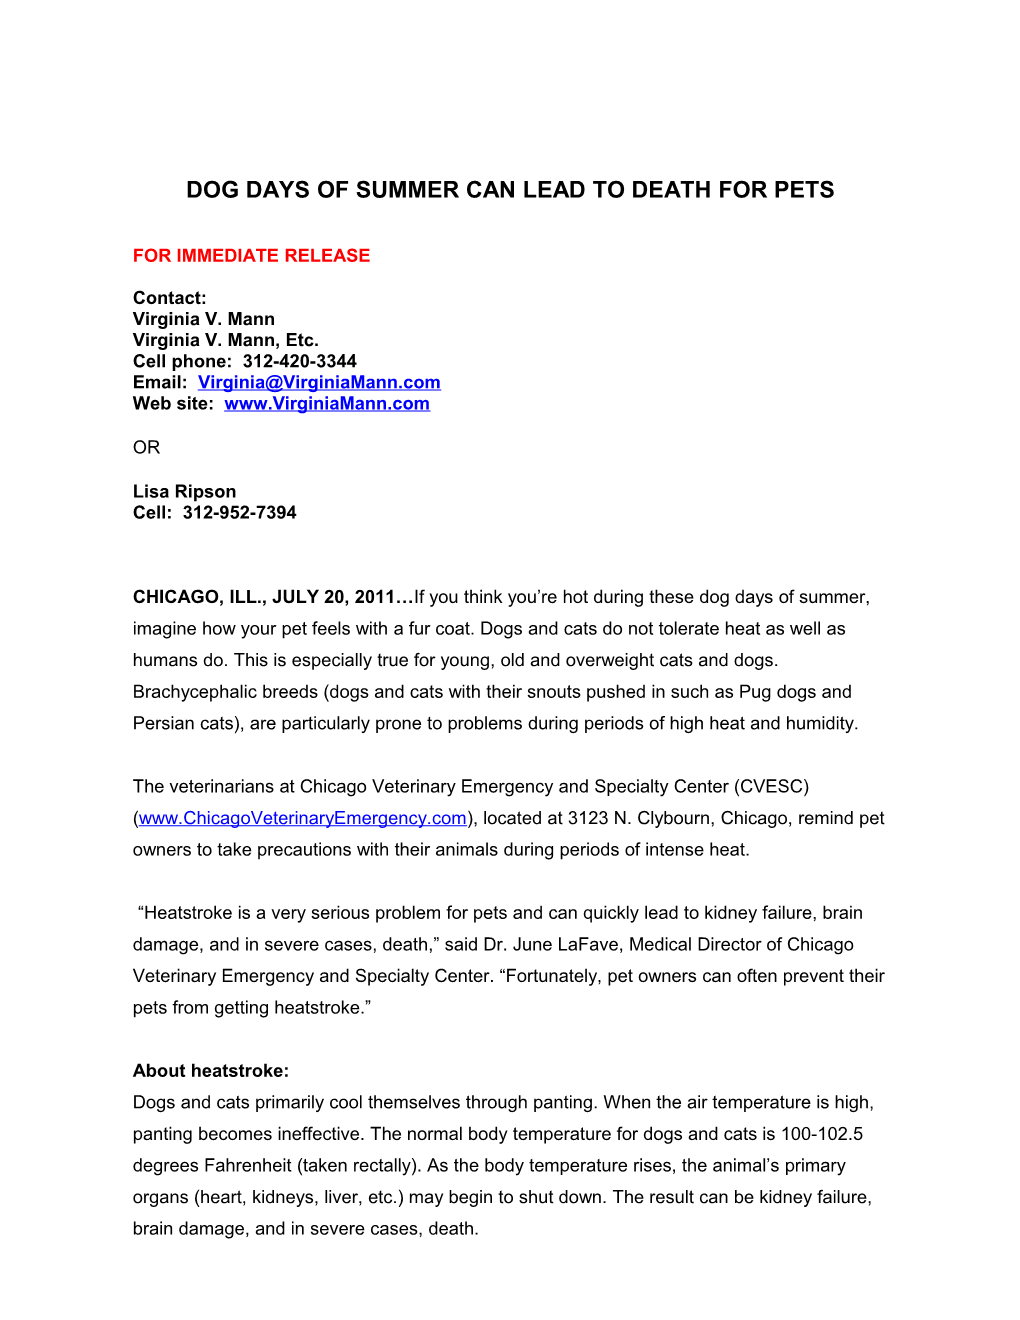 Dog Days of Summer Can Lead to Death for Pets